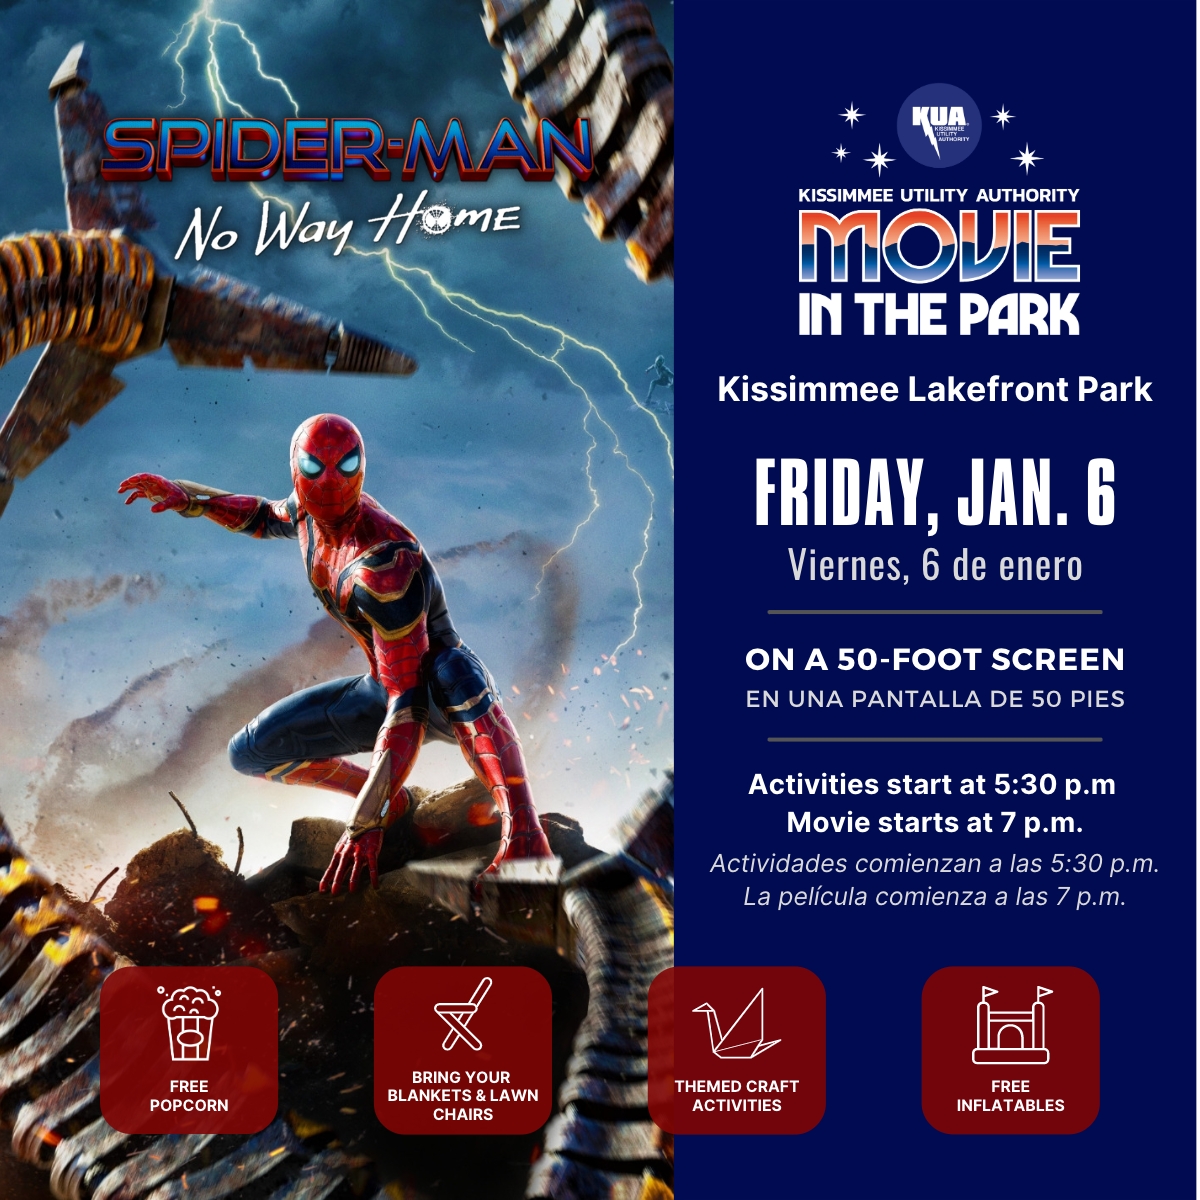 KUA Movie in the Park presenting the movie Spider Man No Way Home